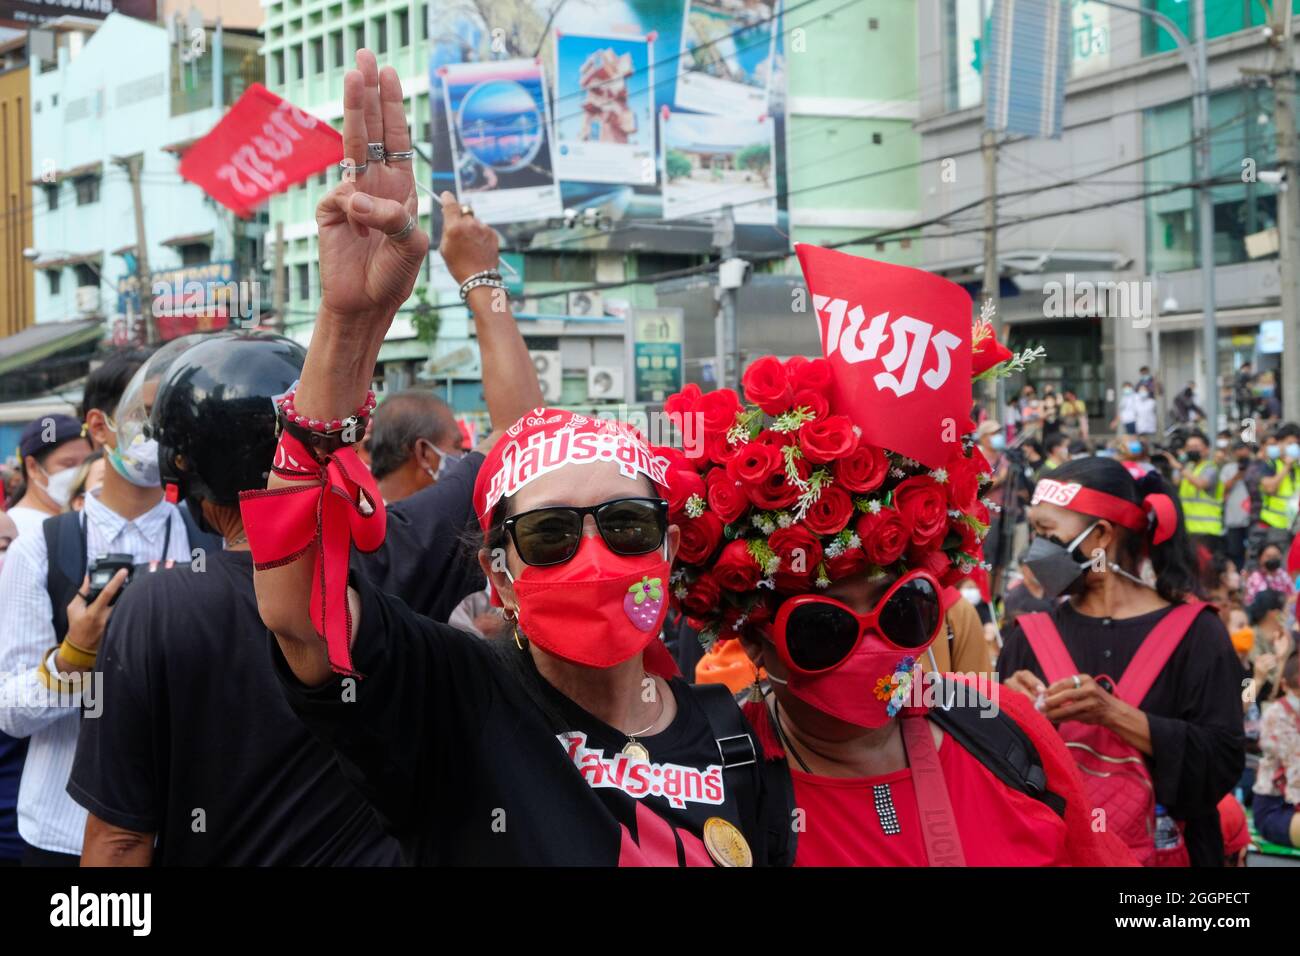 Bangkok, Thailand, 2 September 2021, two women in red protest for the resignation of Prime Minister General Prayut Chan-ocha. The protest is part of an ongoing series across Bangkok to voice disaffection with the current government's performance during the COVID pandemic. Credit: James Patrick/Alamy Live News Stock Photo